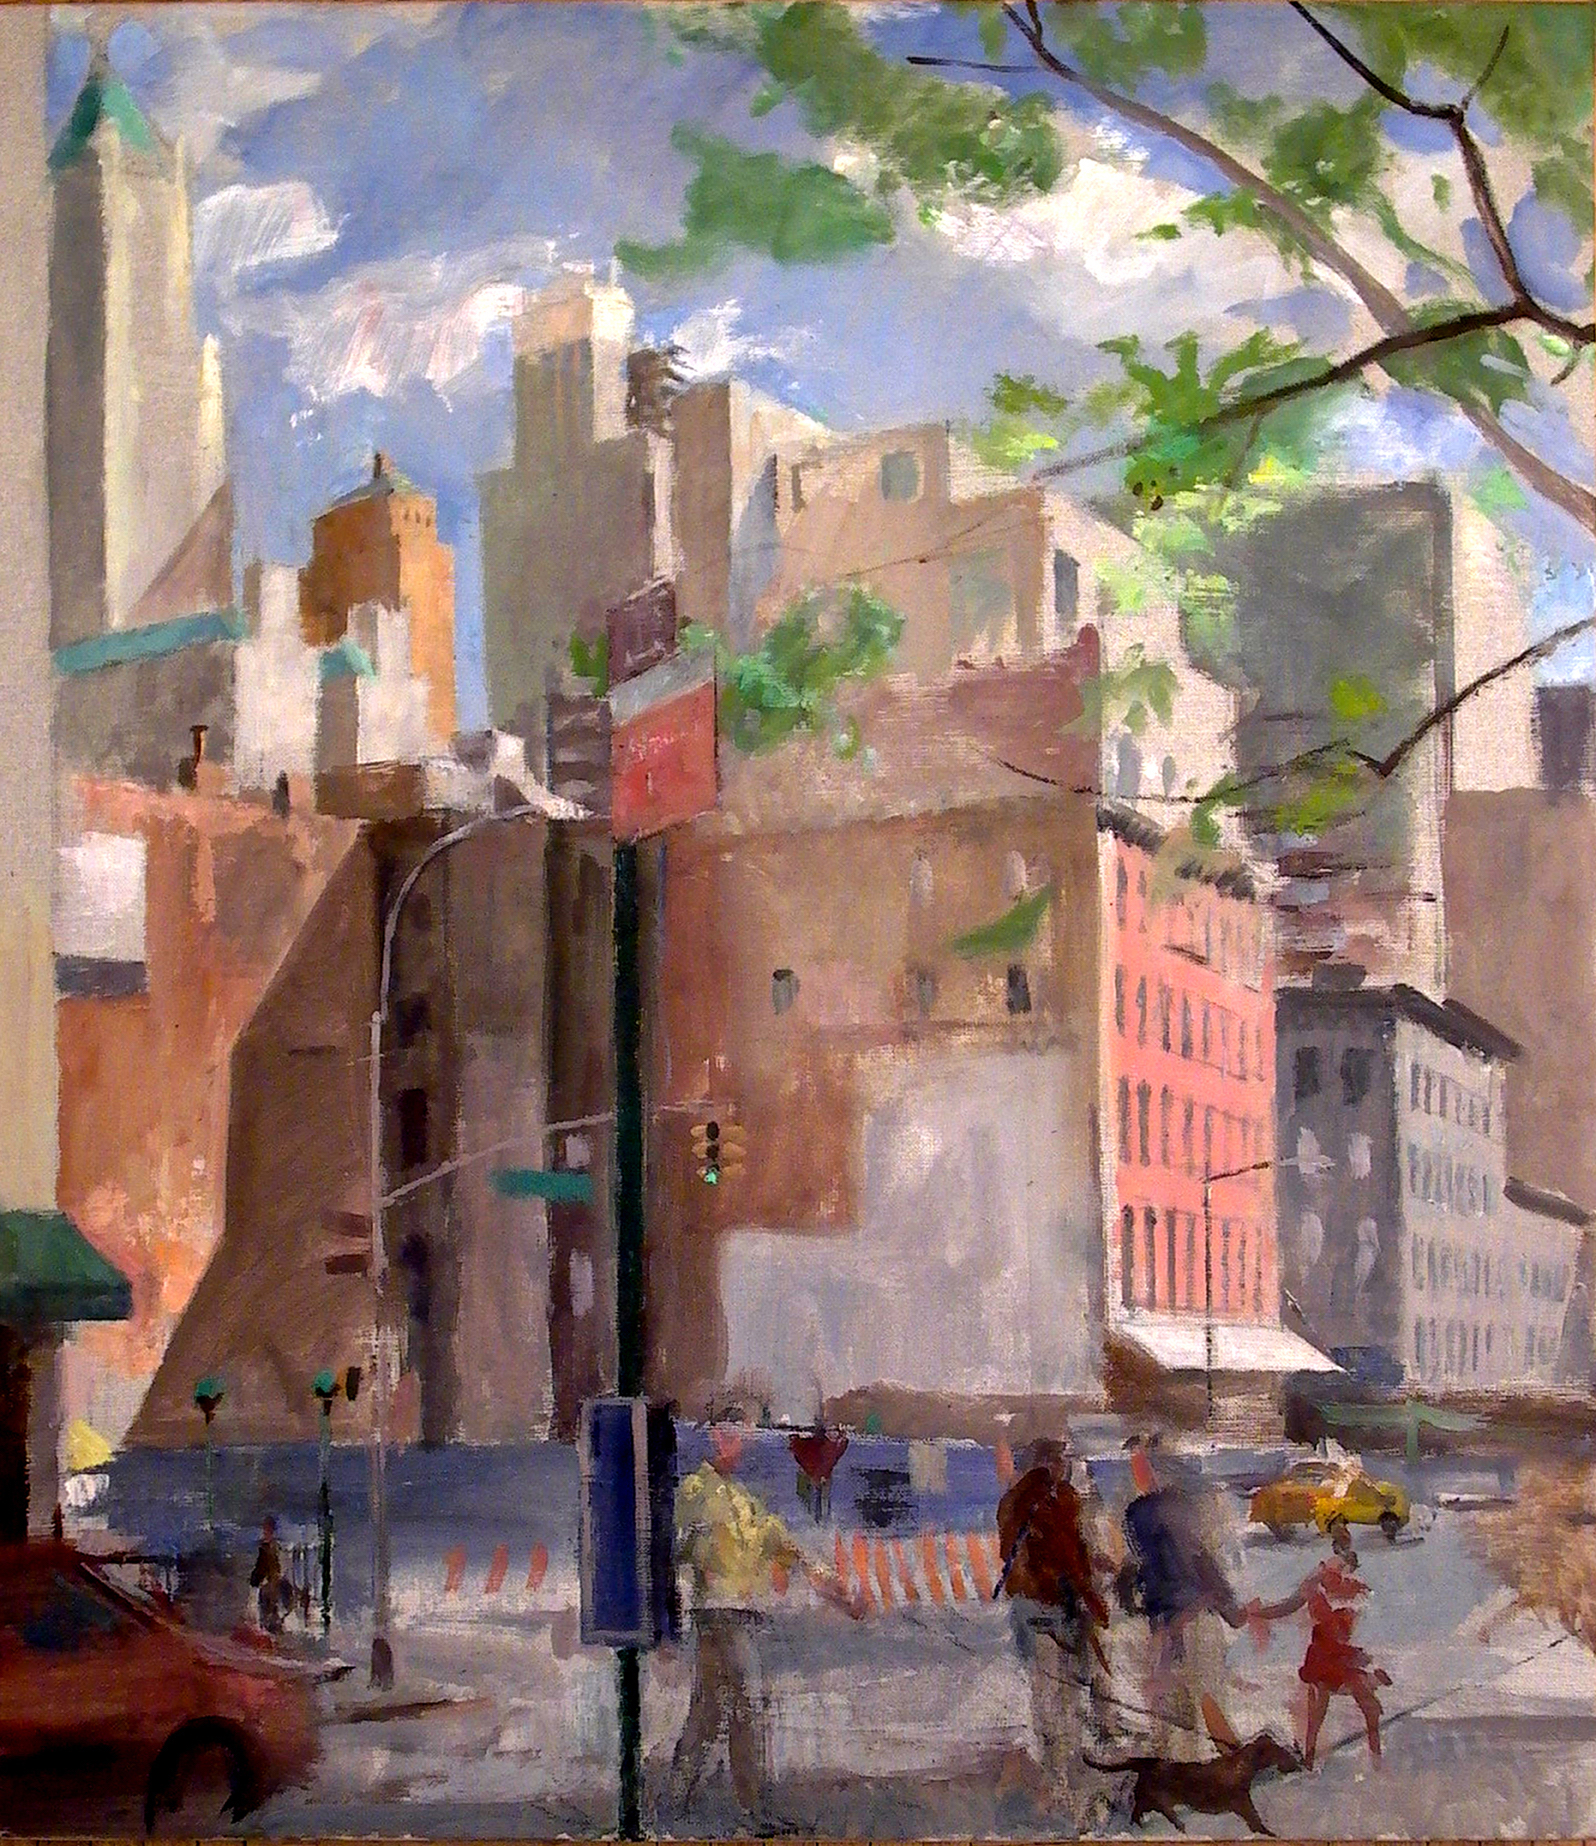 West Broadway and Chambers, oil on linen, 30 x 26 inches, 2007